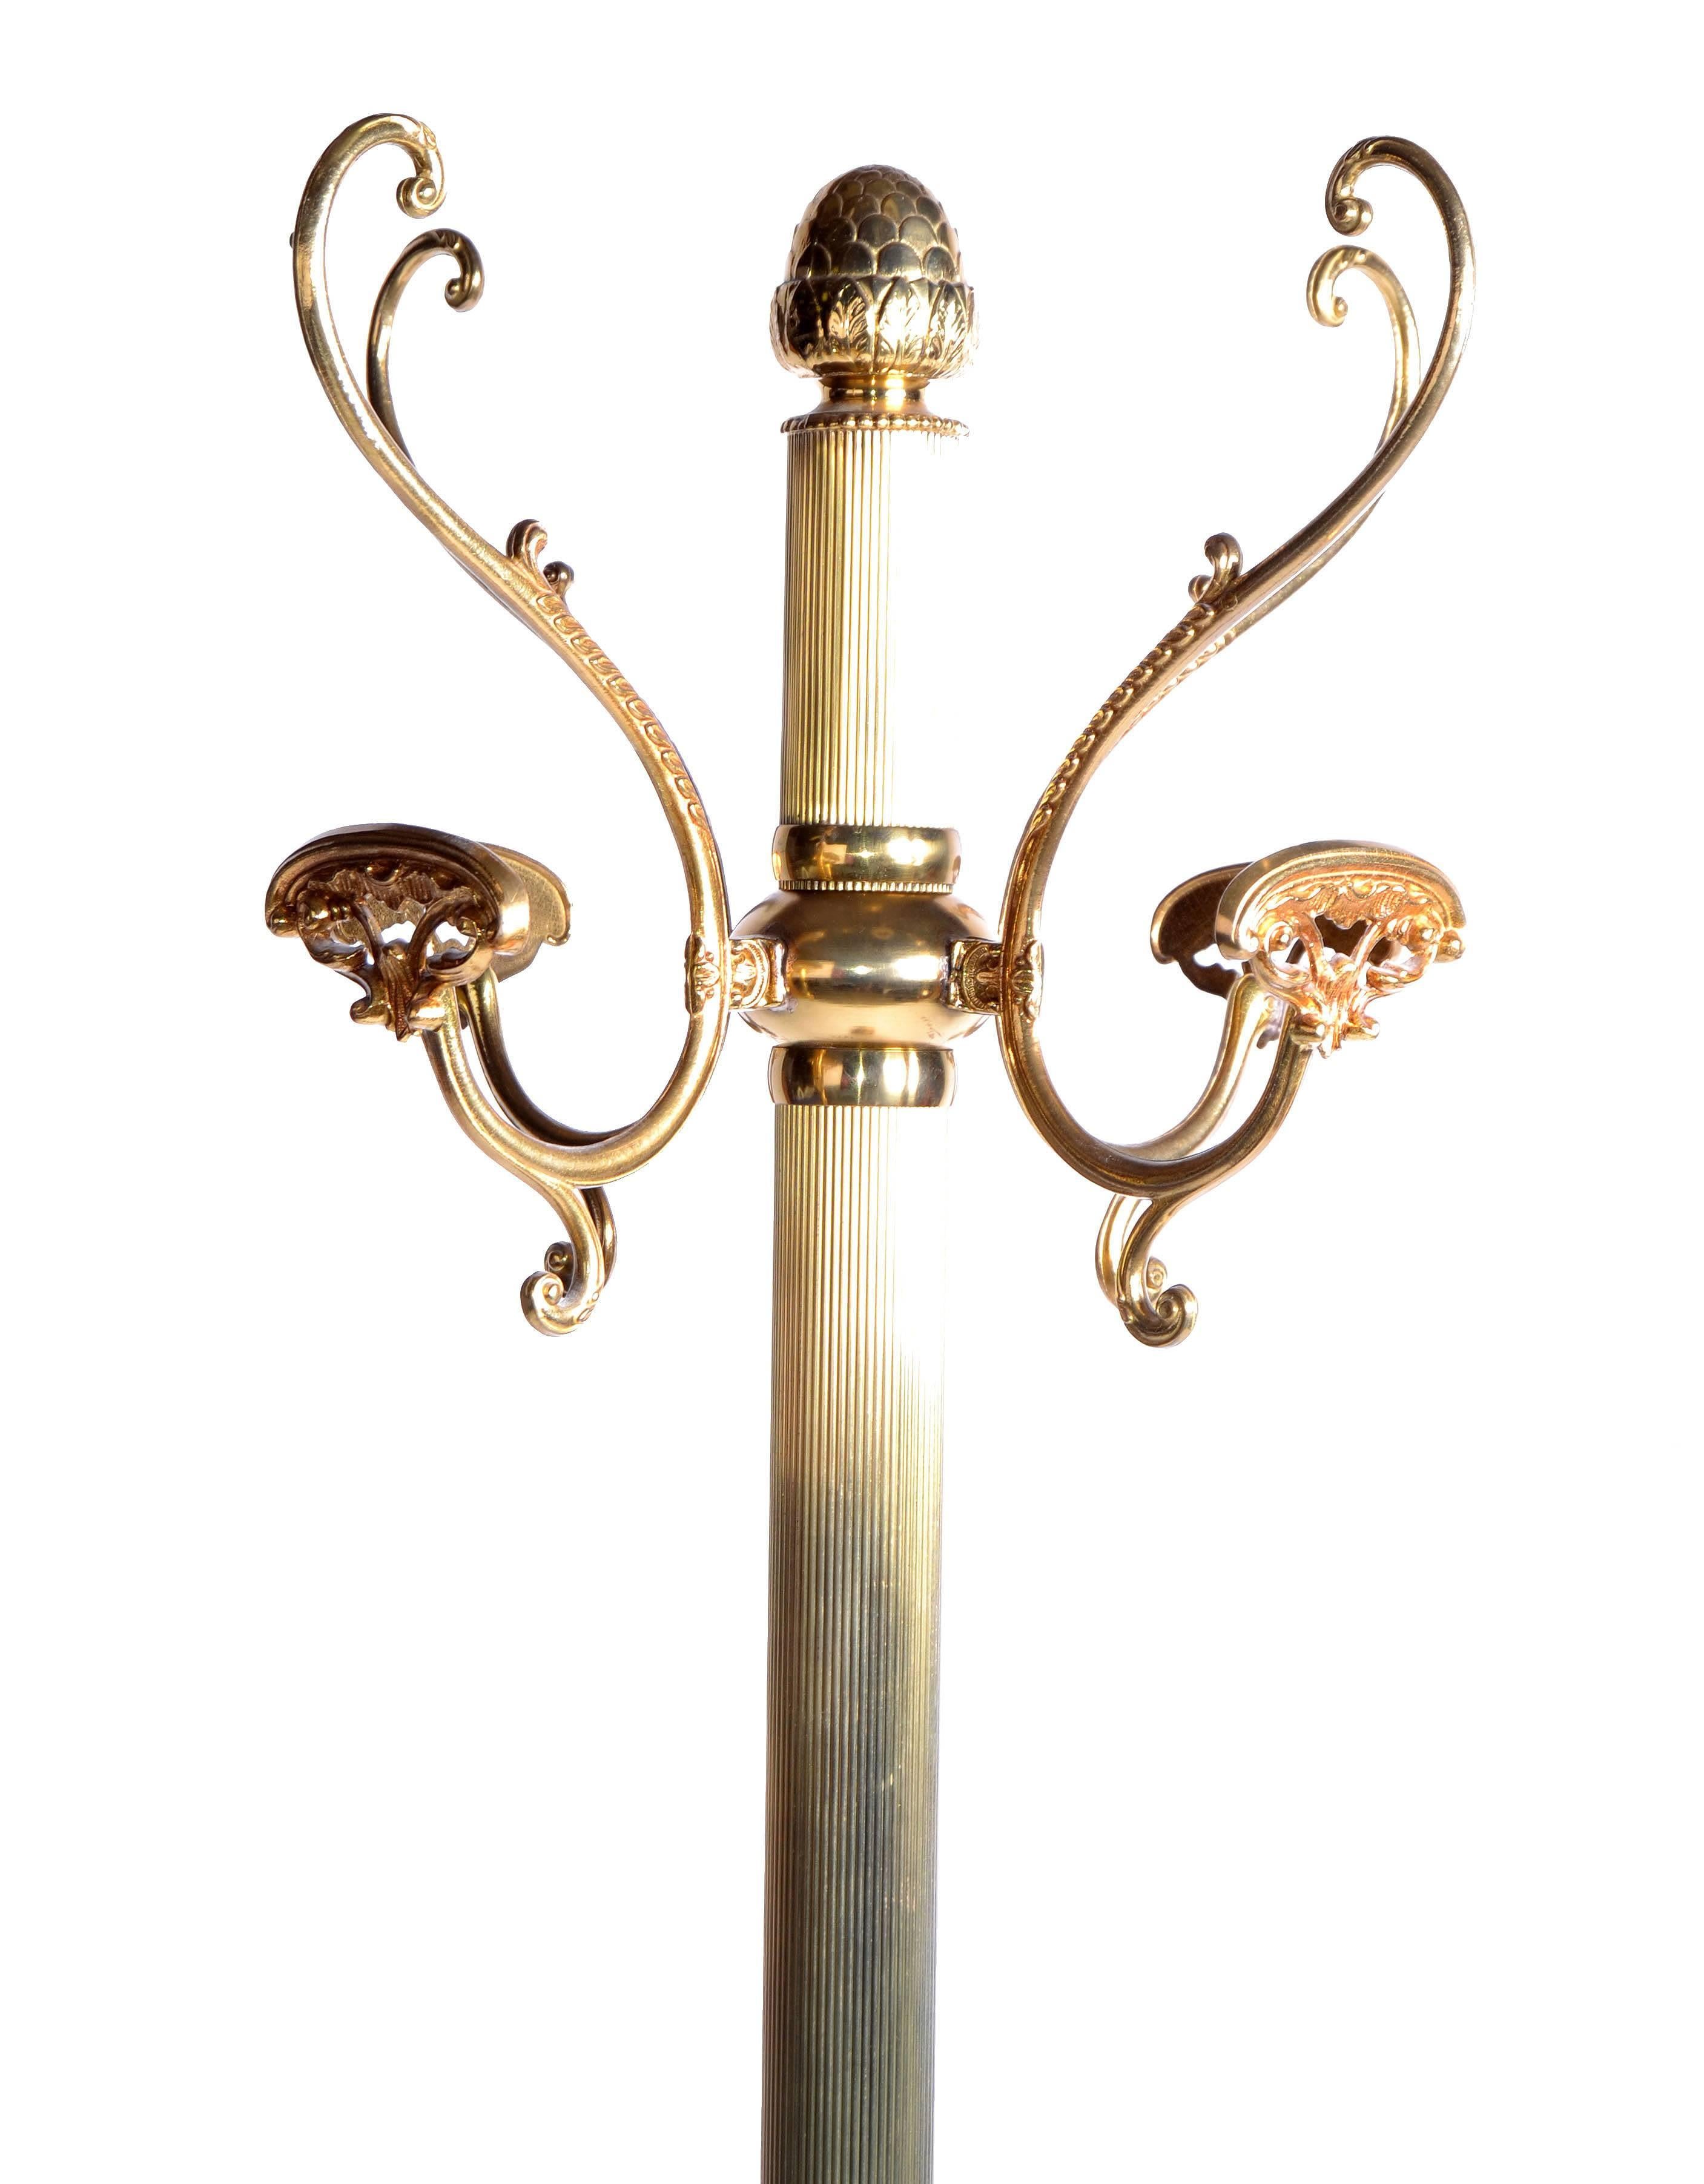 Solid brass coat stand with decorative details as acorn, leaves, special hat hooks. Overall a masterpiece of craftsmanship. No markings.